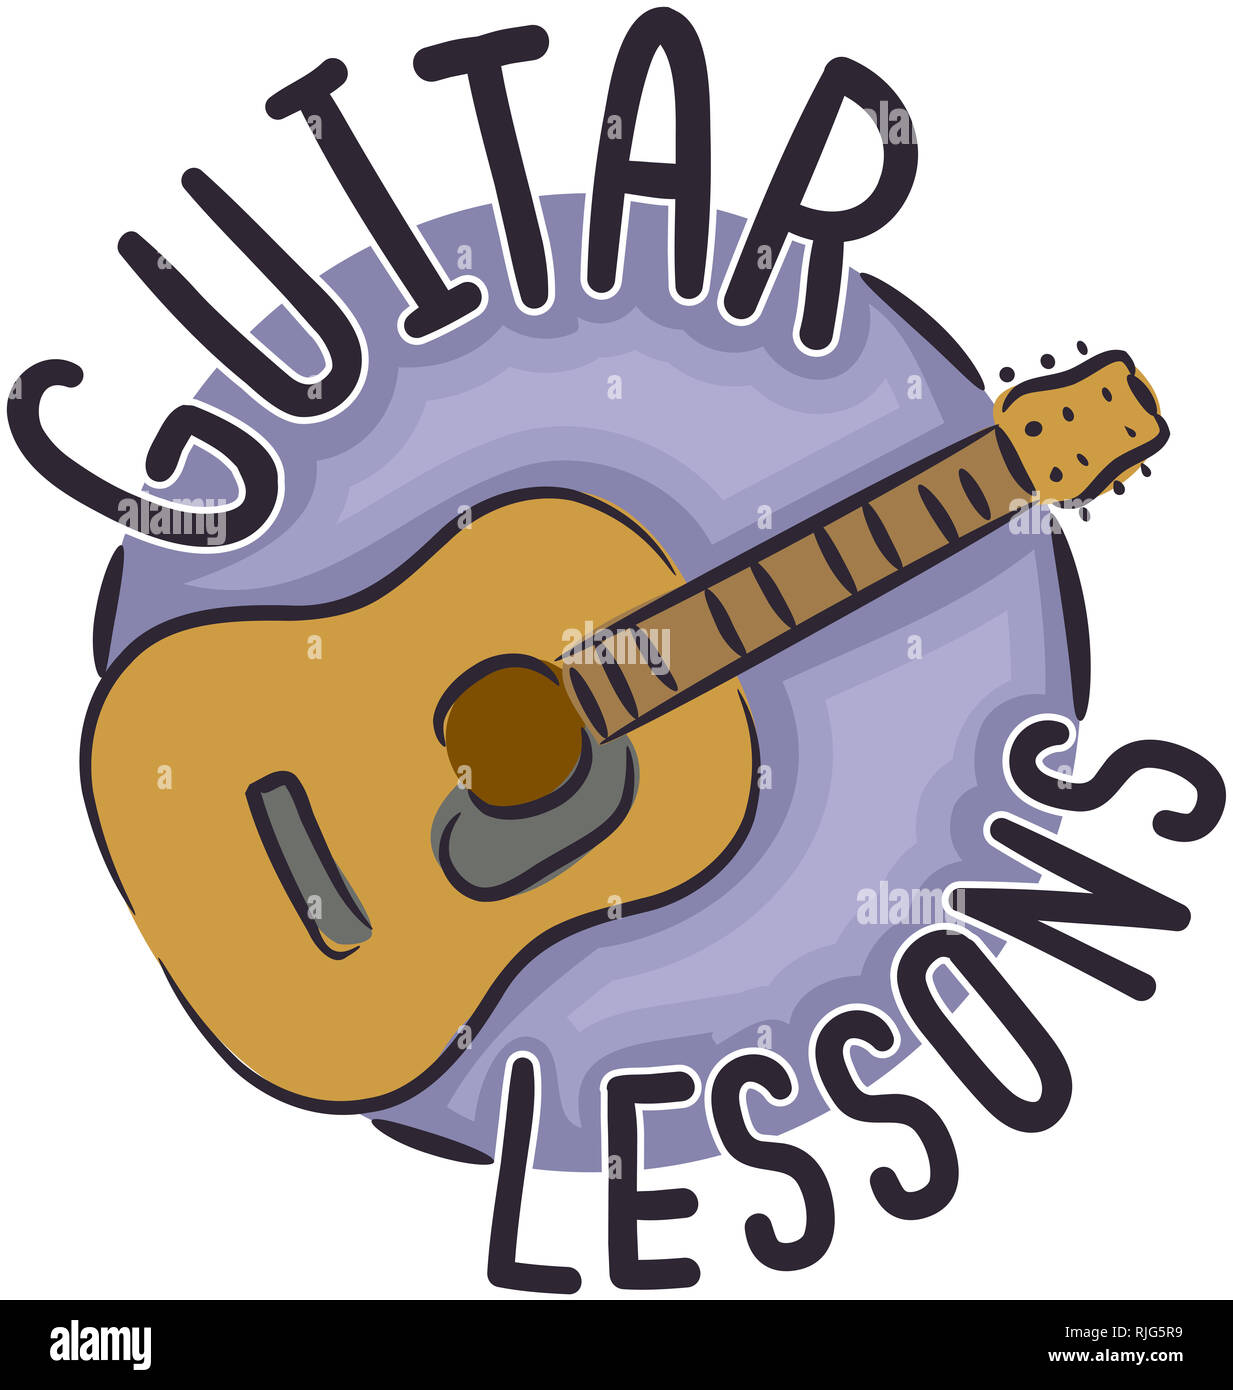 Illustration of an Acoustic Guitar with Guitar Lessons Icon Stock ...